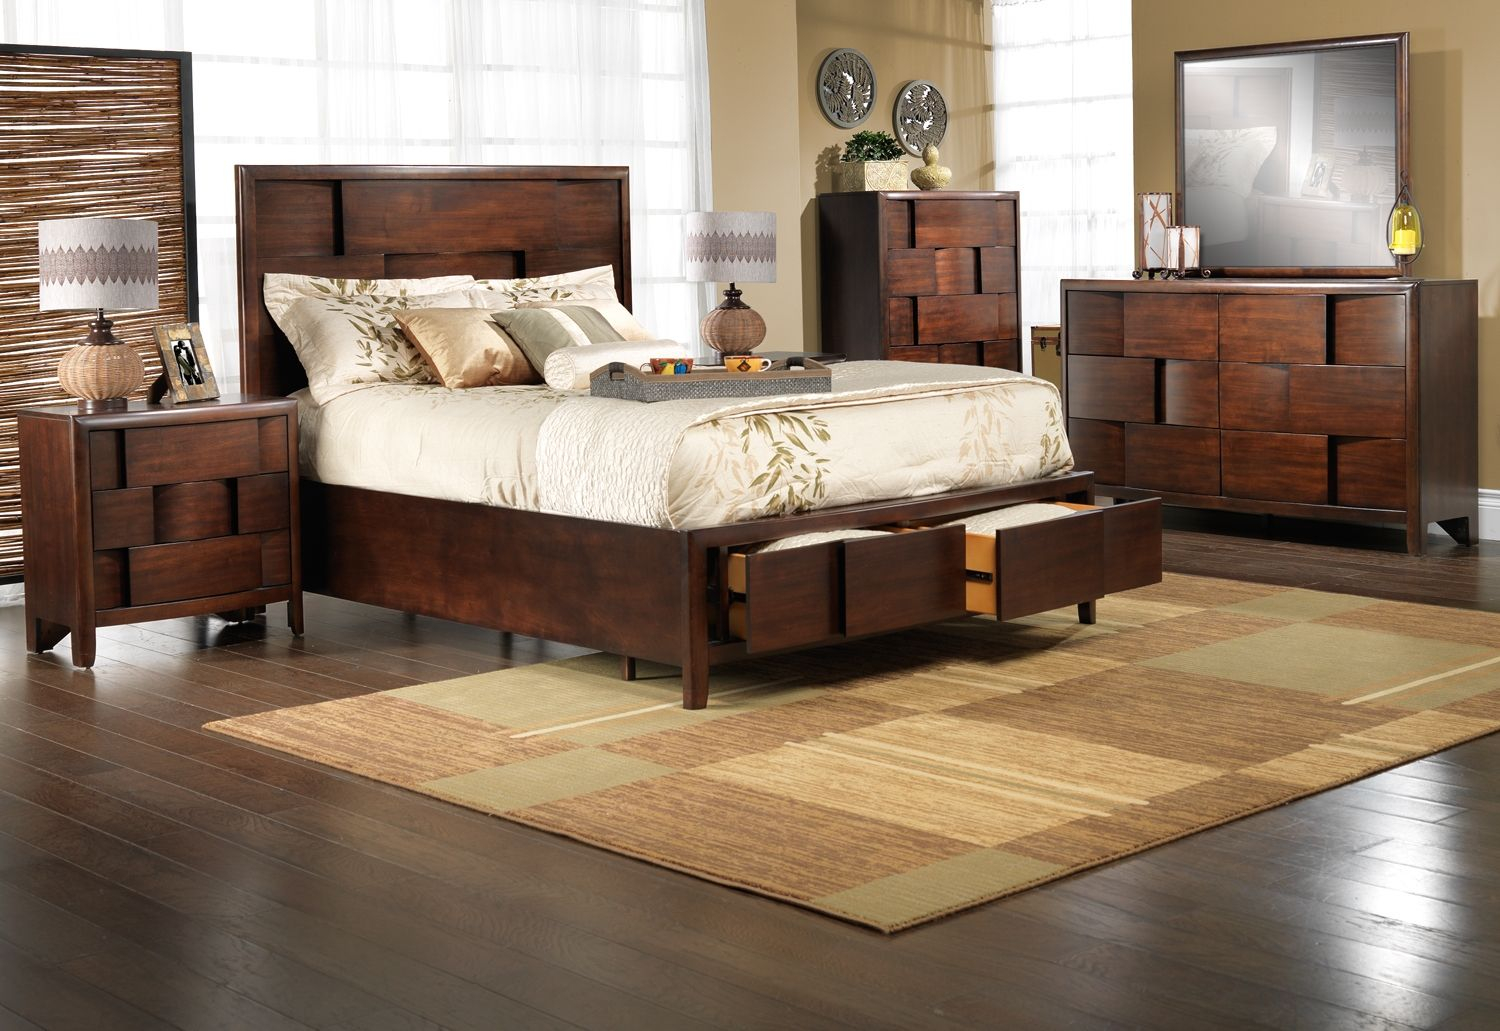 Nova Bedroom Collection Leons Personalizing My Home King intended for size 1500 X 1031